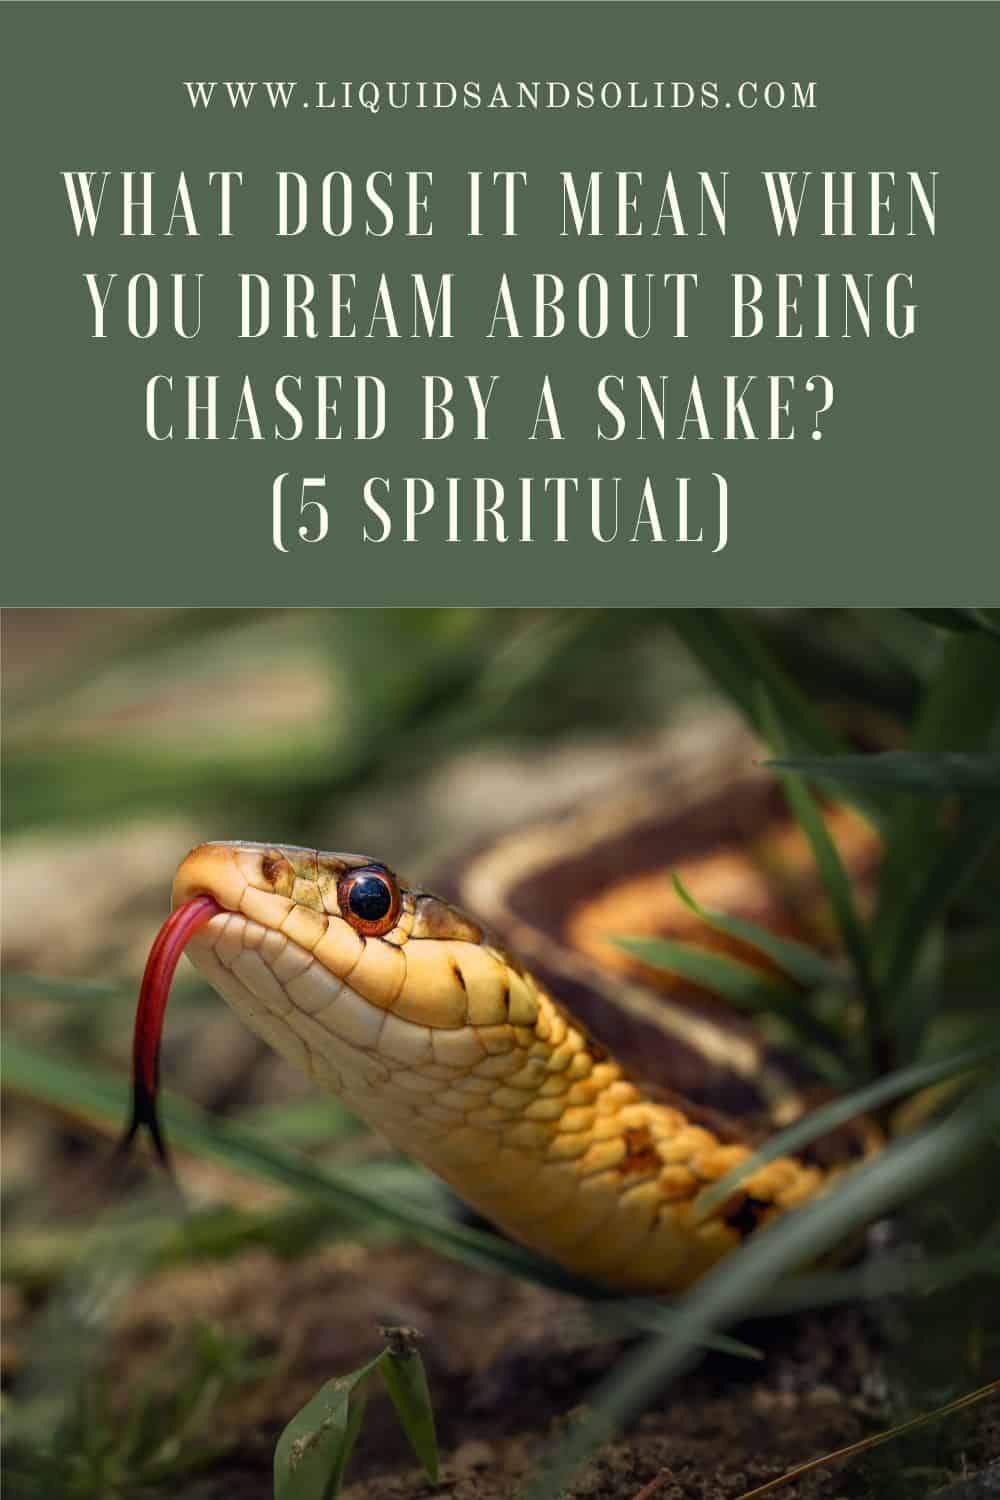  Dream About Being Chased by a Snake? (5 vaimset tähendust)